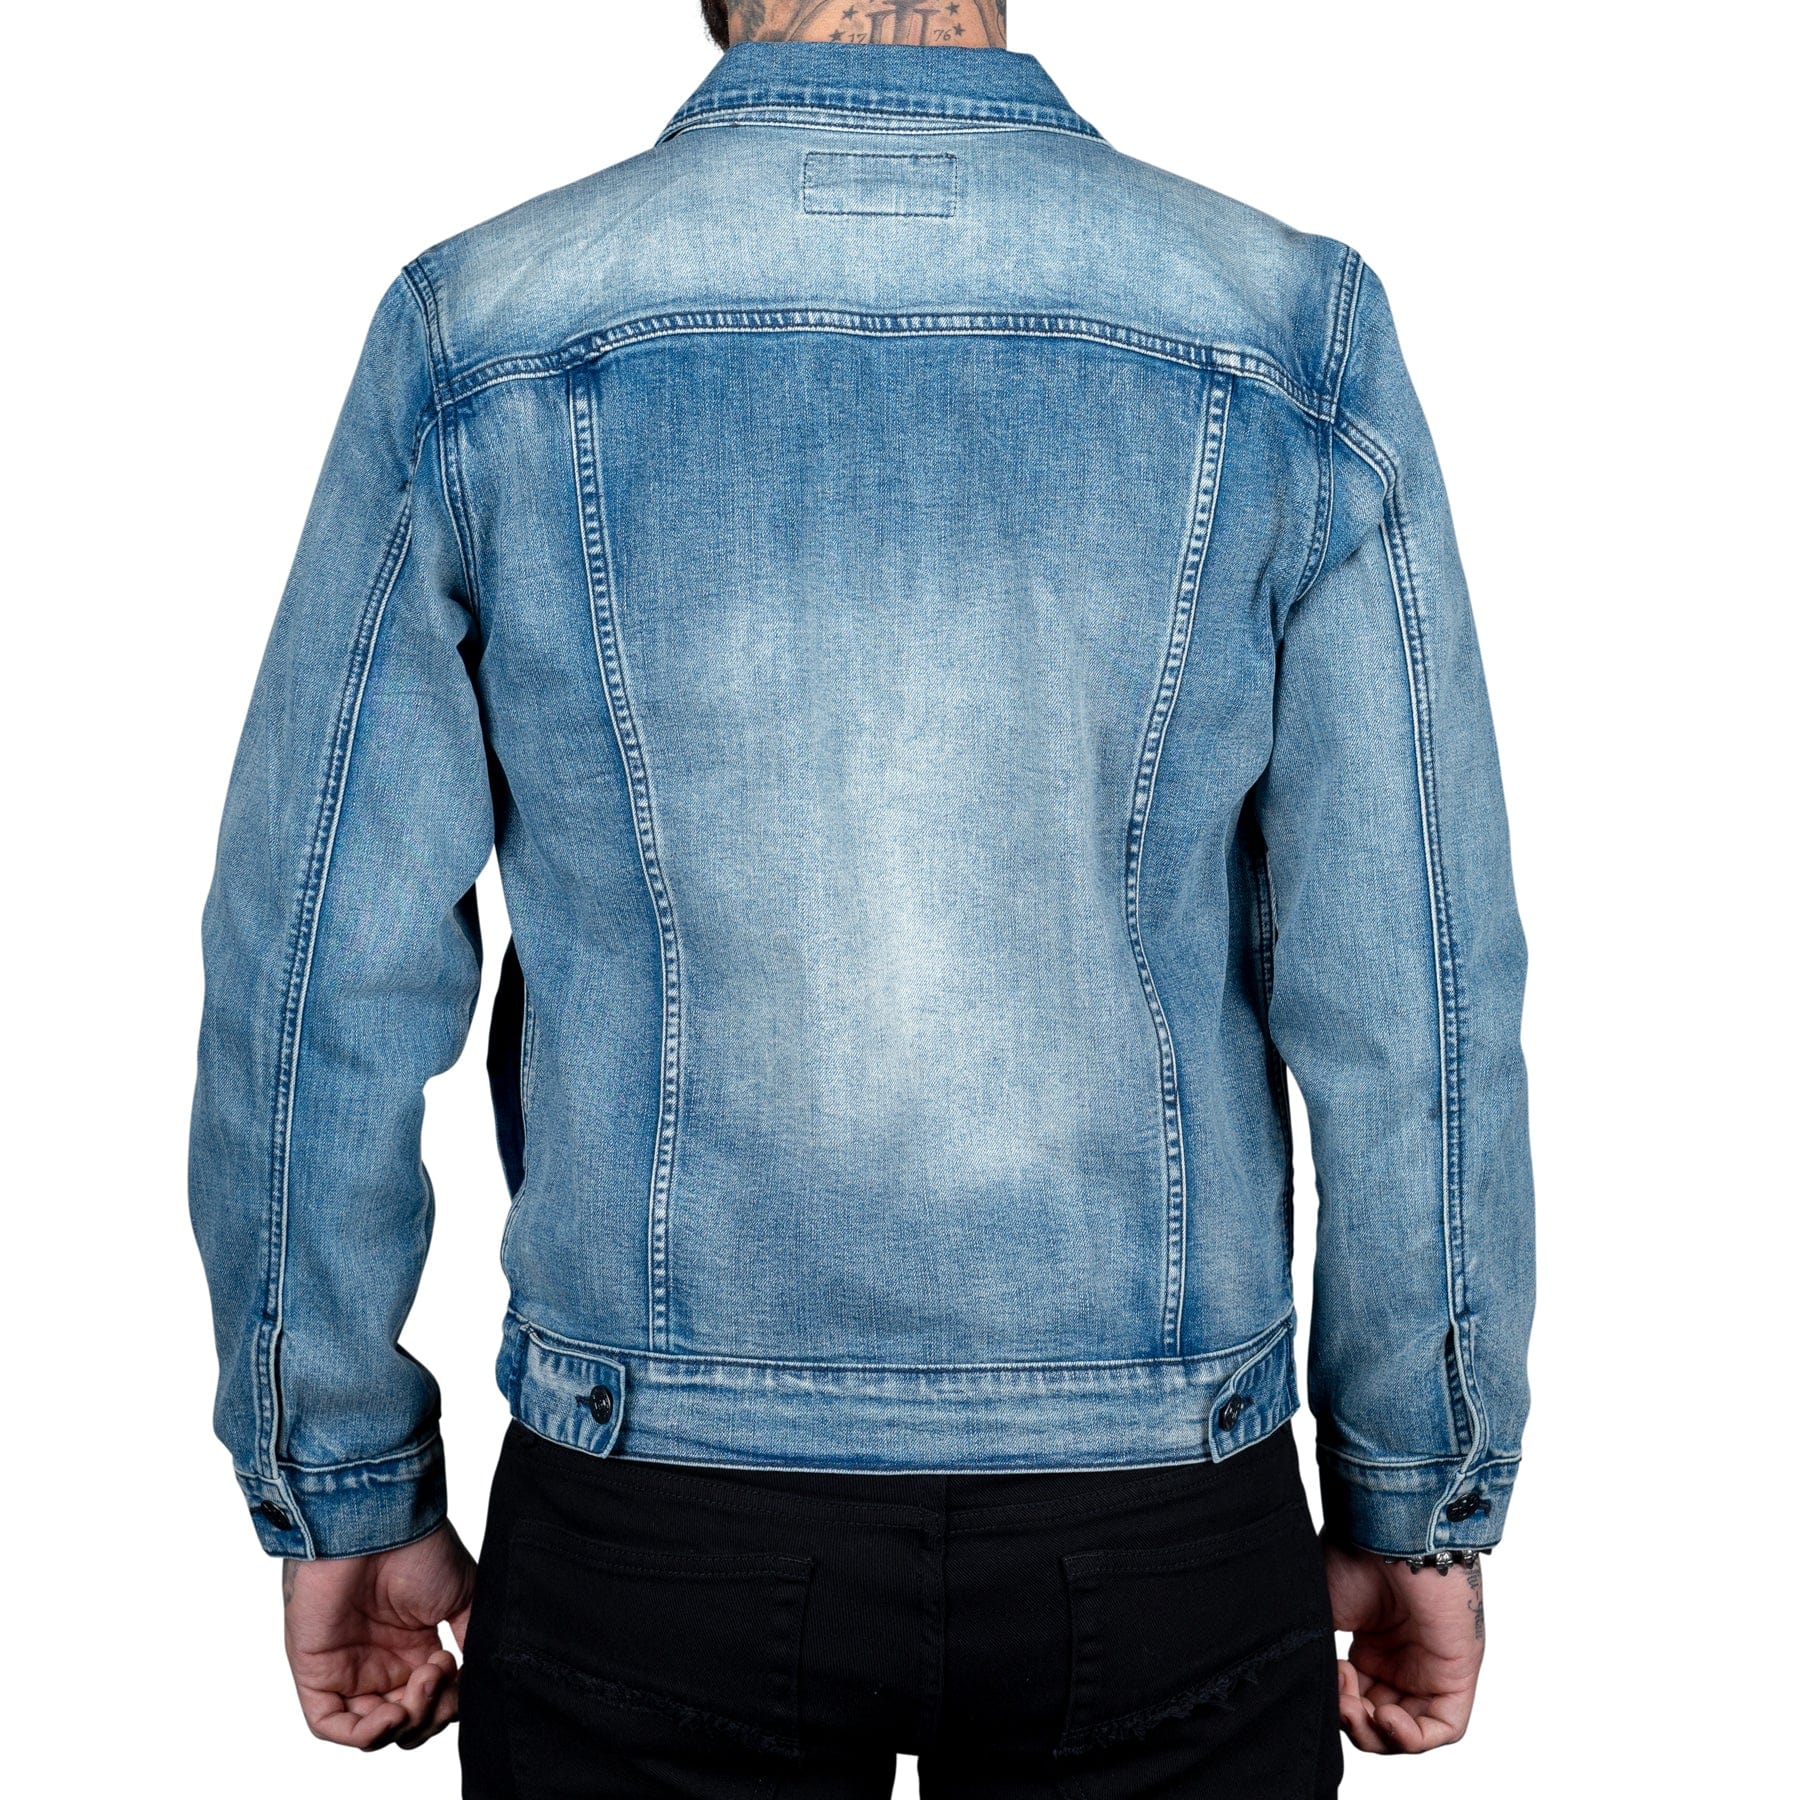 Essentials Collection Jacket Idolmaker Jacket - Classic Blue